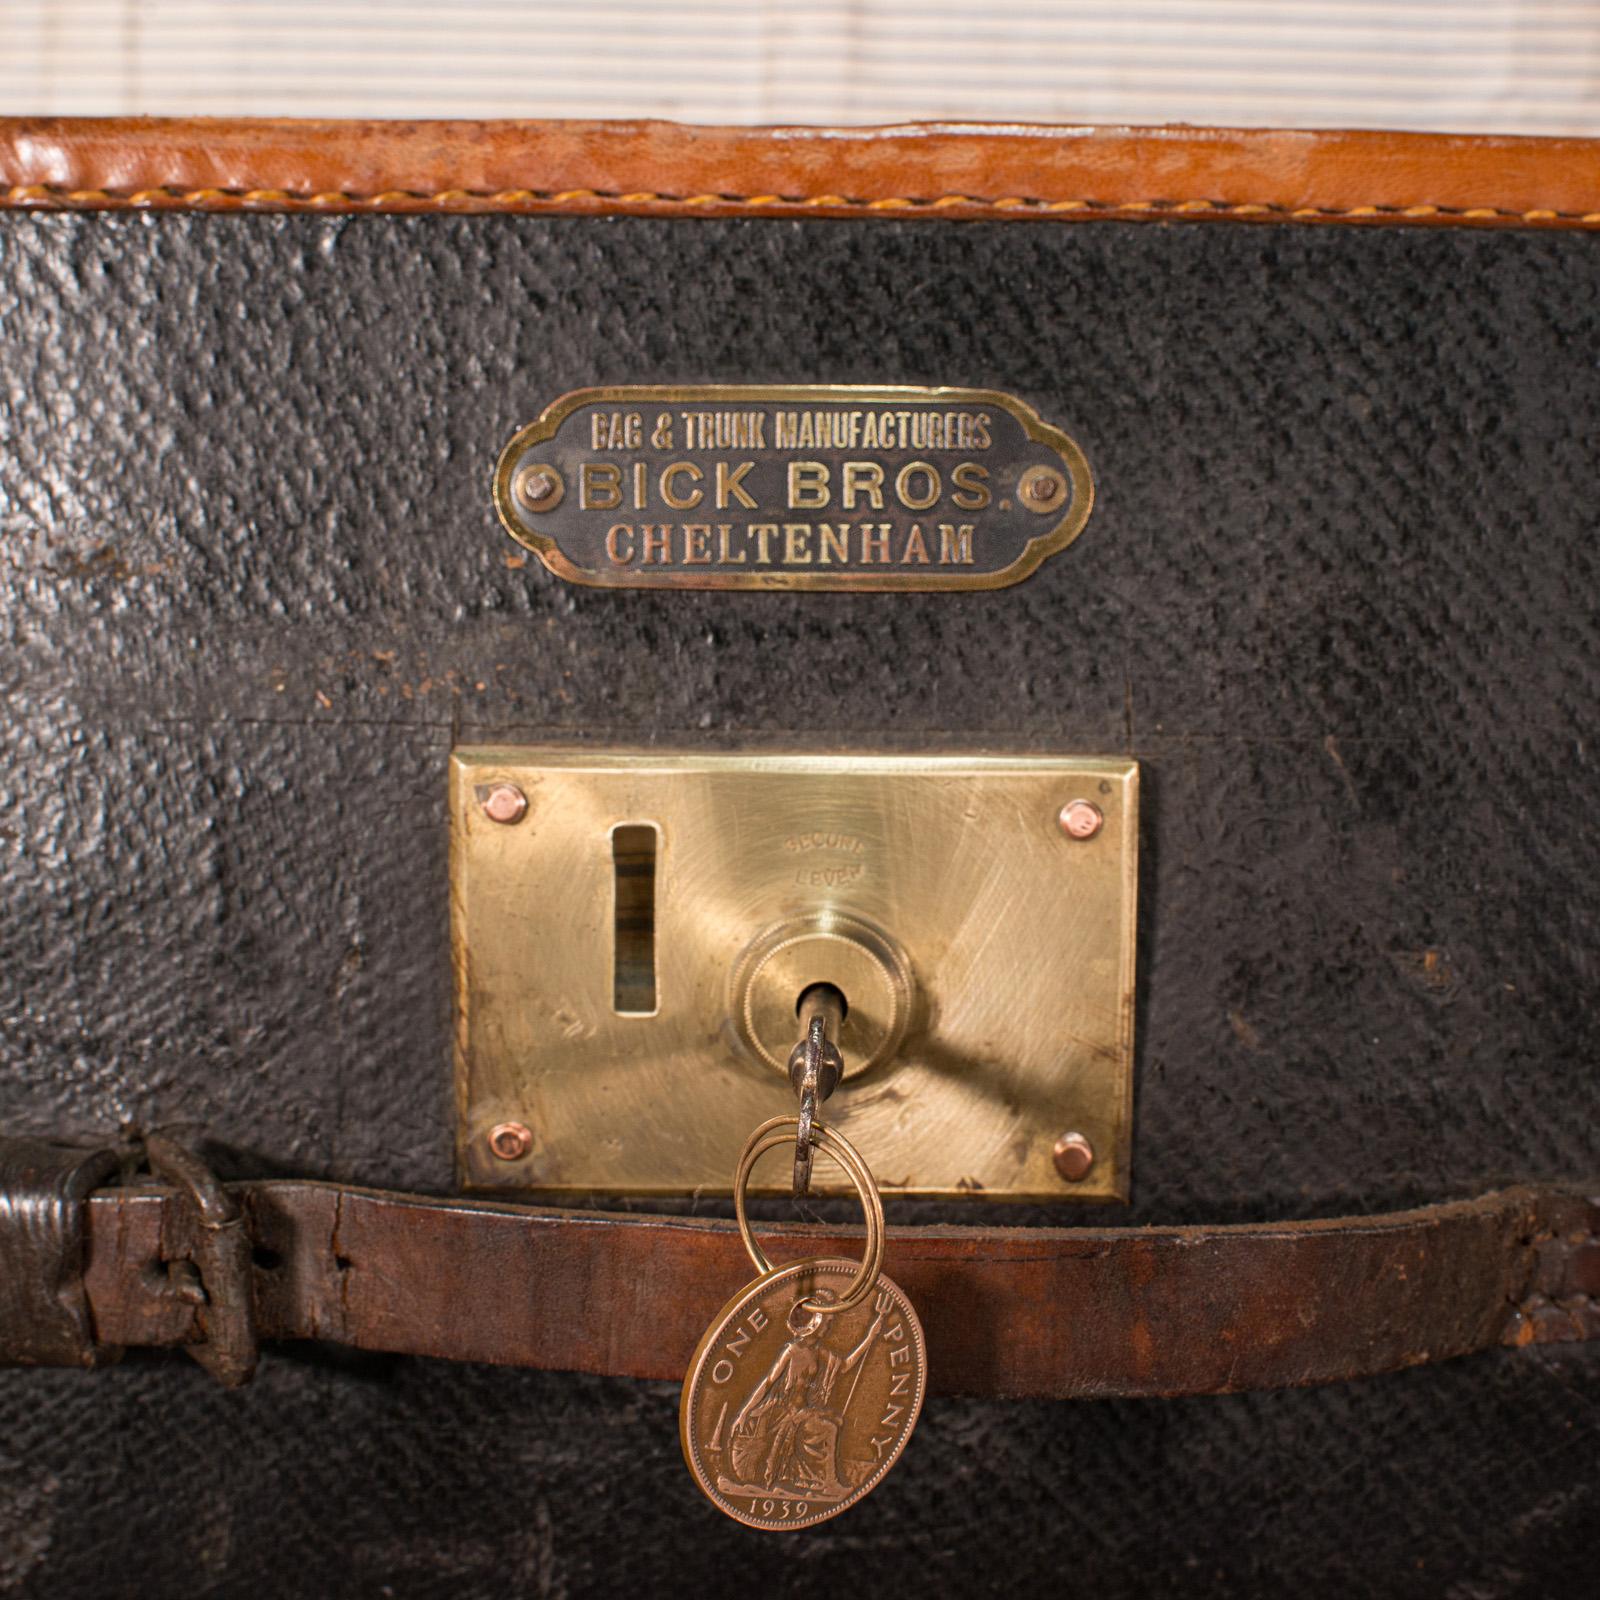 Vintage Overseas Voyage Trunk, English, Leather, Travel Case, Luggage, C.1930 For Sale 3